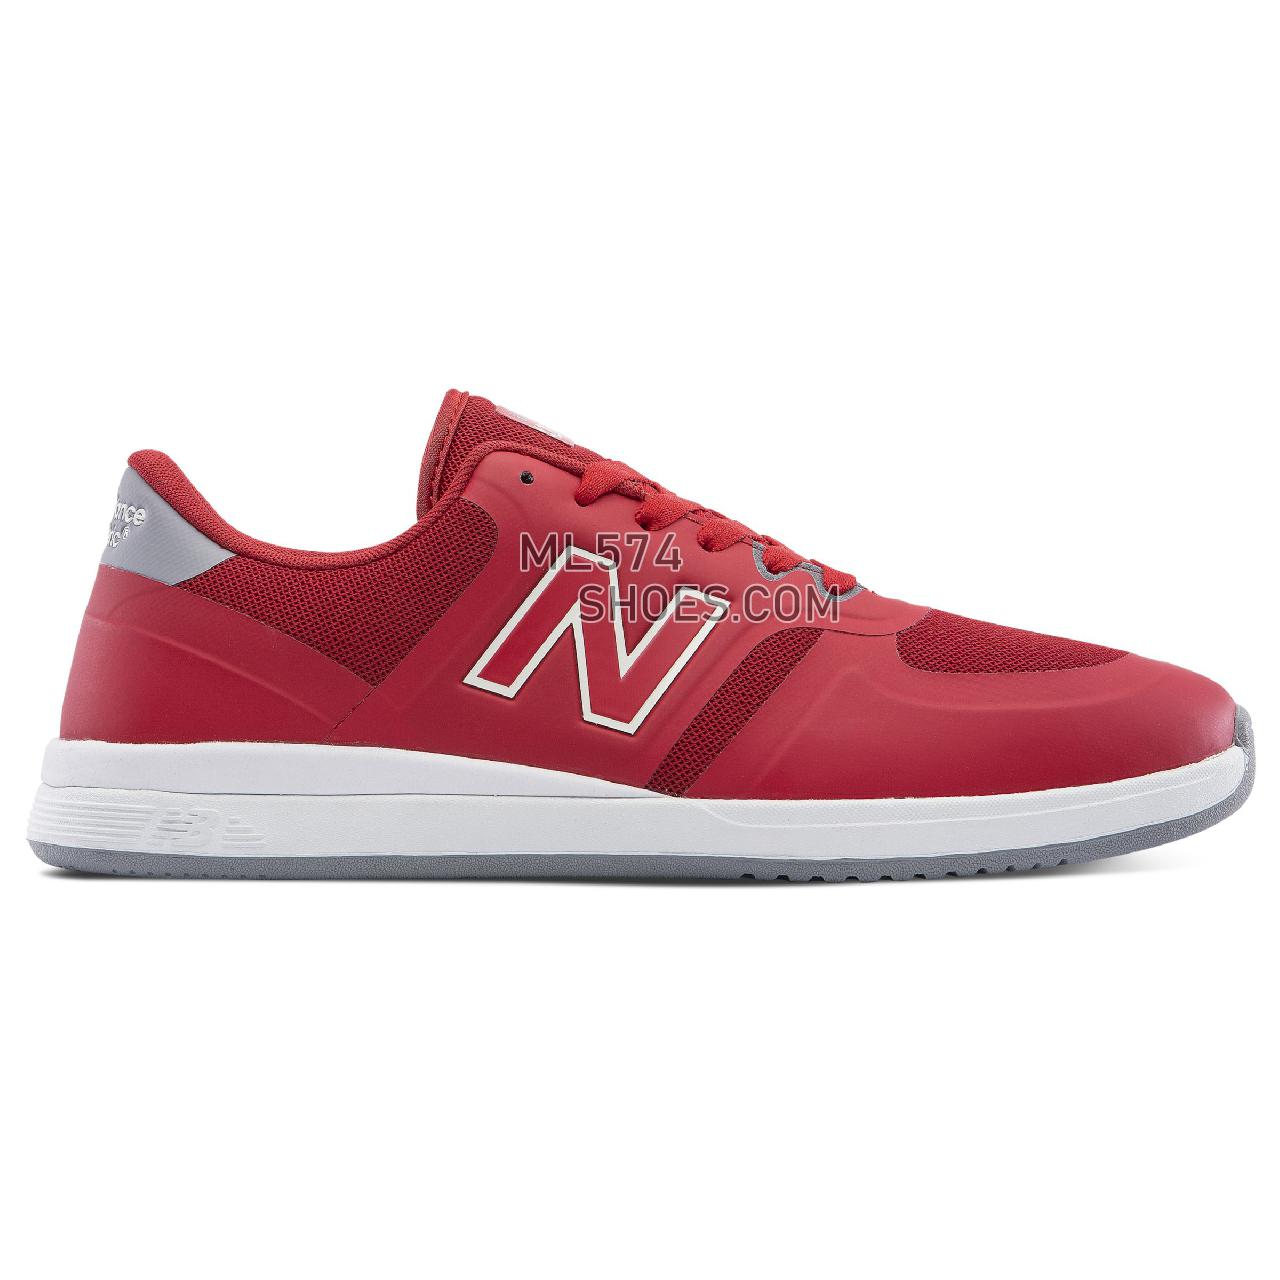 New Balance 420 - Men's 420 - Classic Red with White - NM420RED